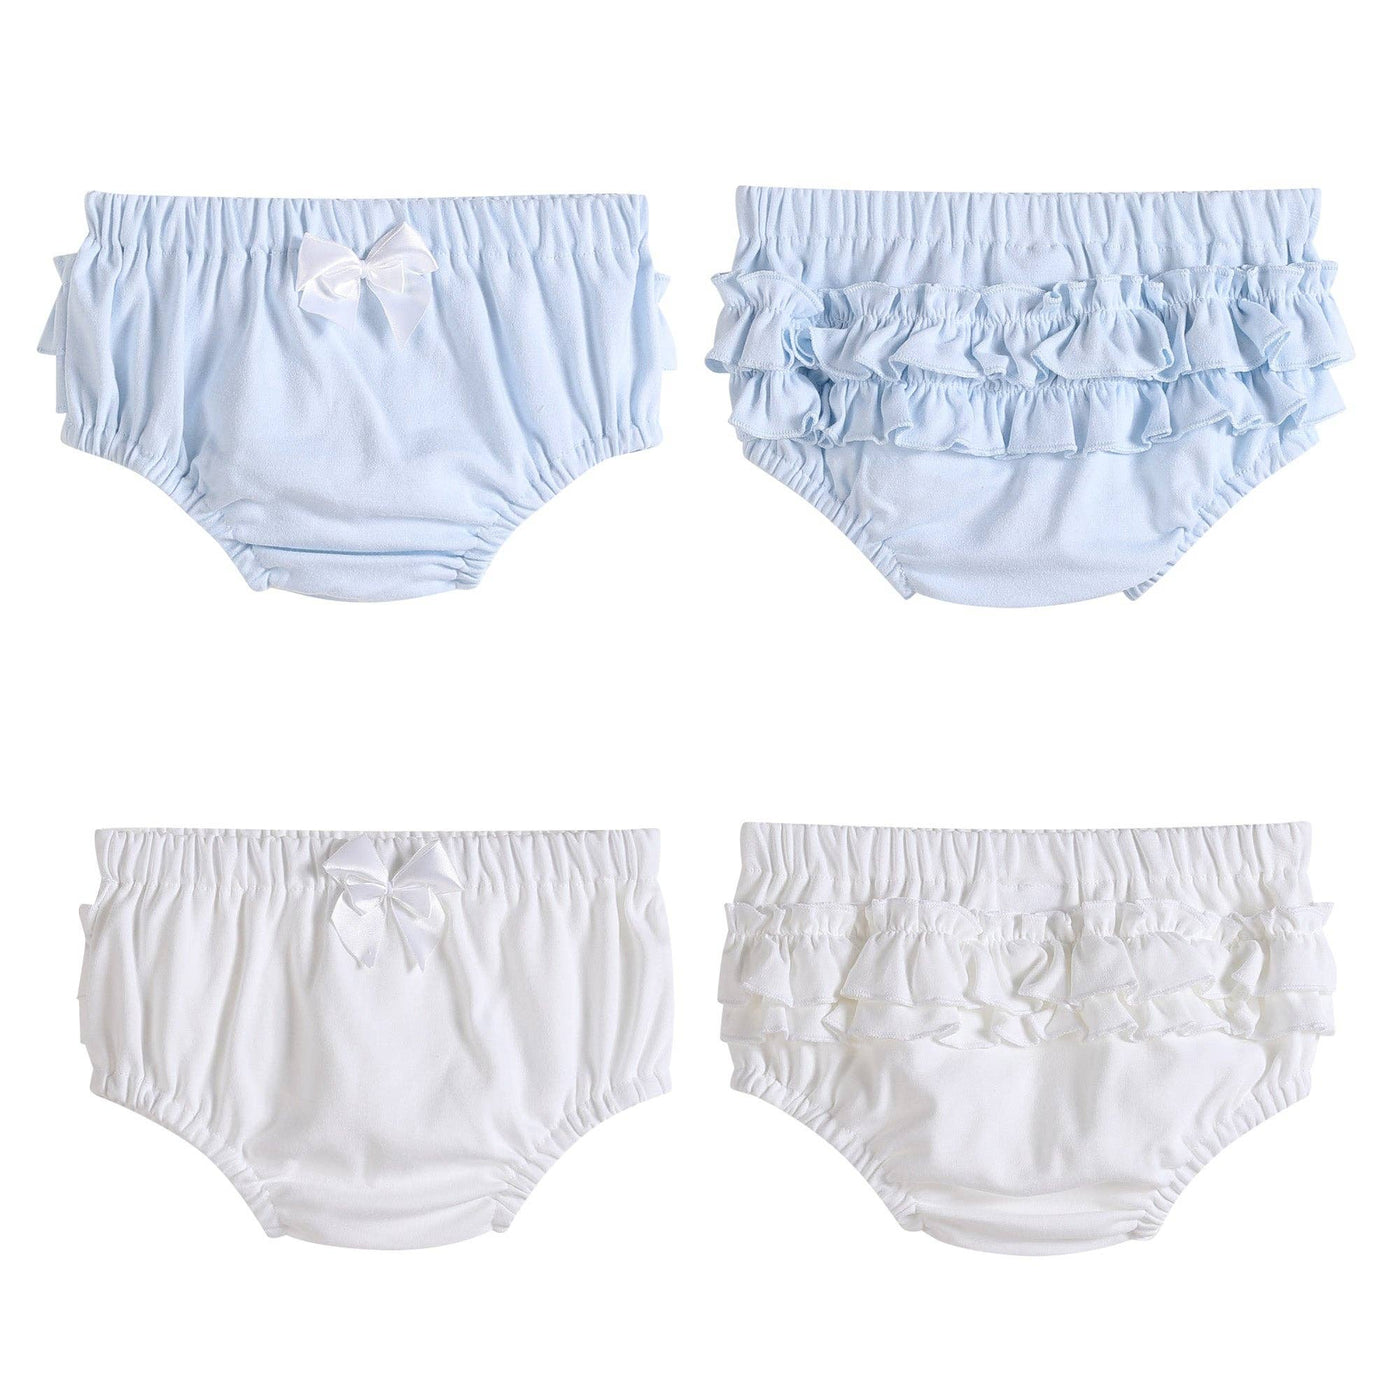 2 pc Light Blue and White Ruffle Knit Cotton Baby Bloomers